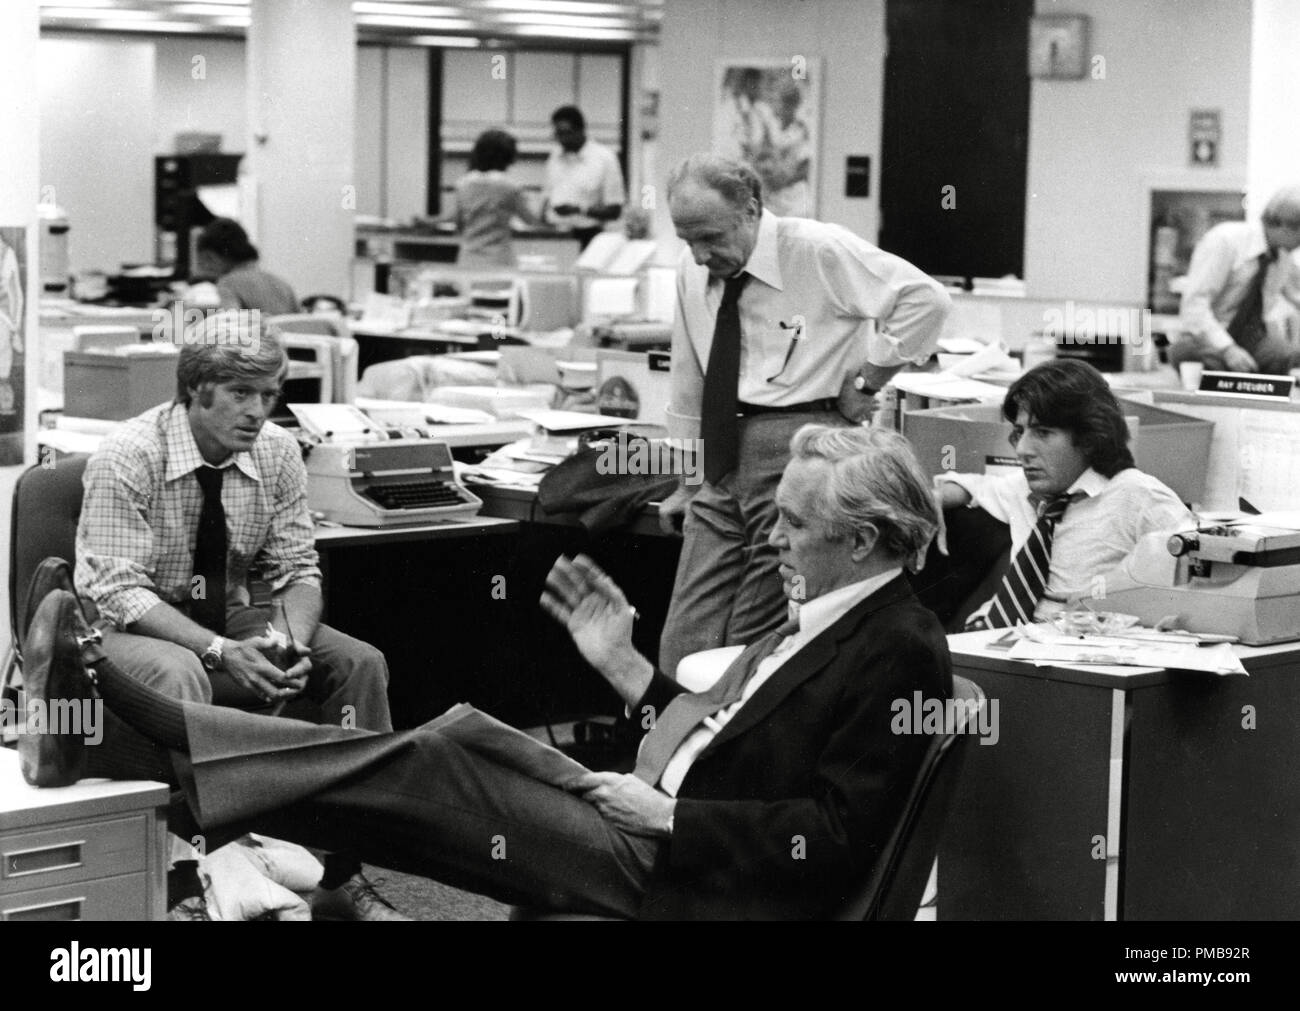 Robert Redford, Jack Warden, Jason Robards, Dustin Hoffman, 'All the President's Men', 1976 Warner Brothers     File Reference # 32557 432THA Stock Photo